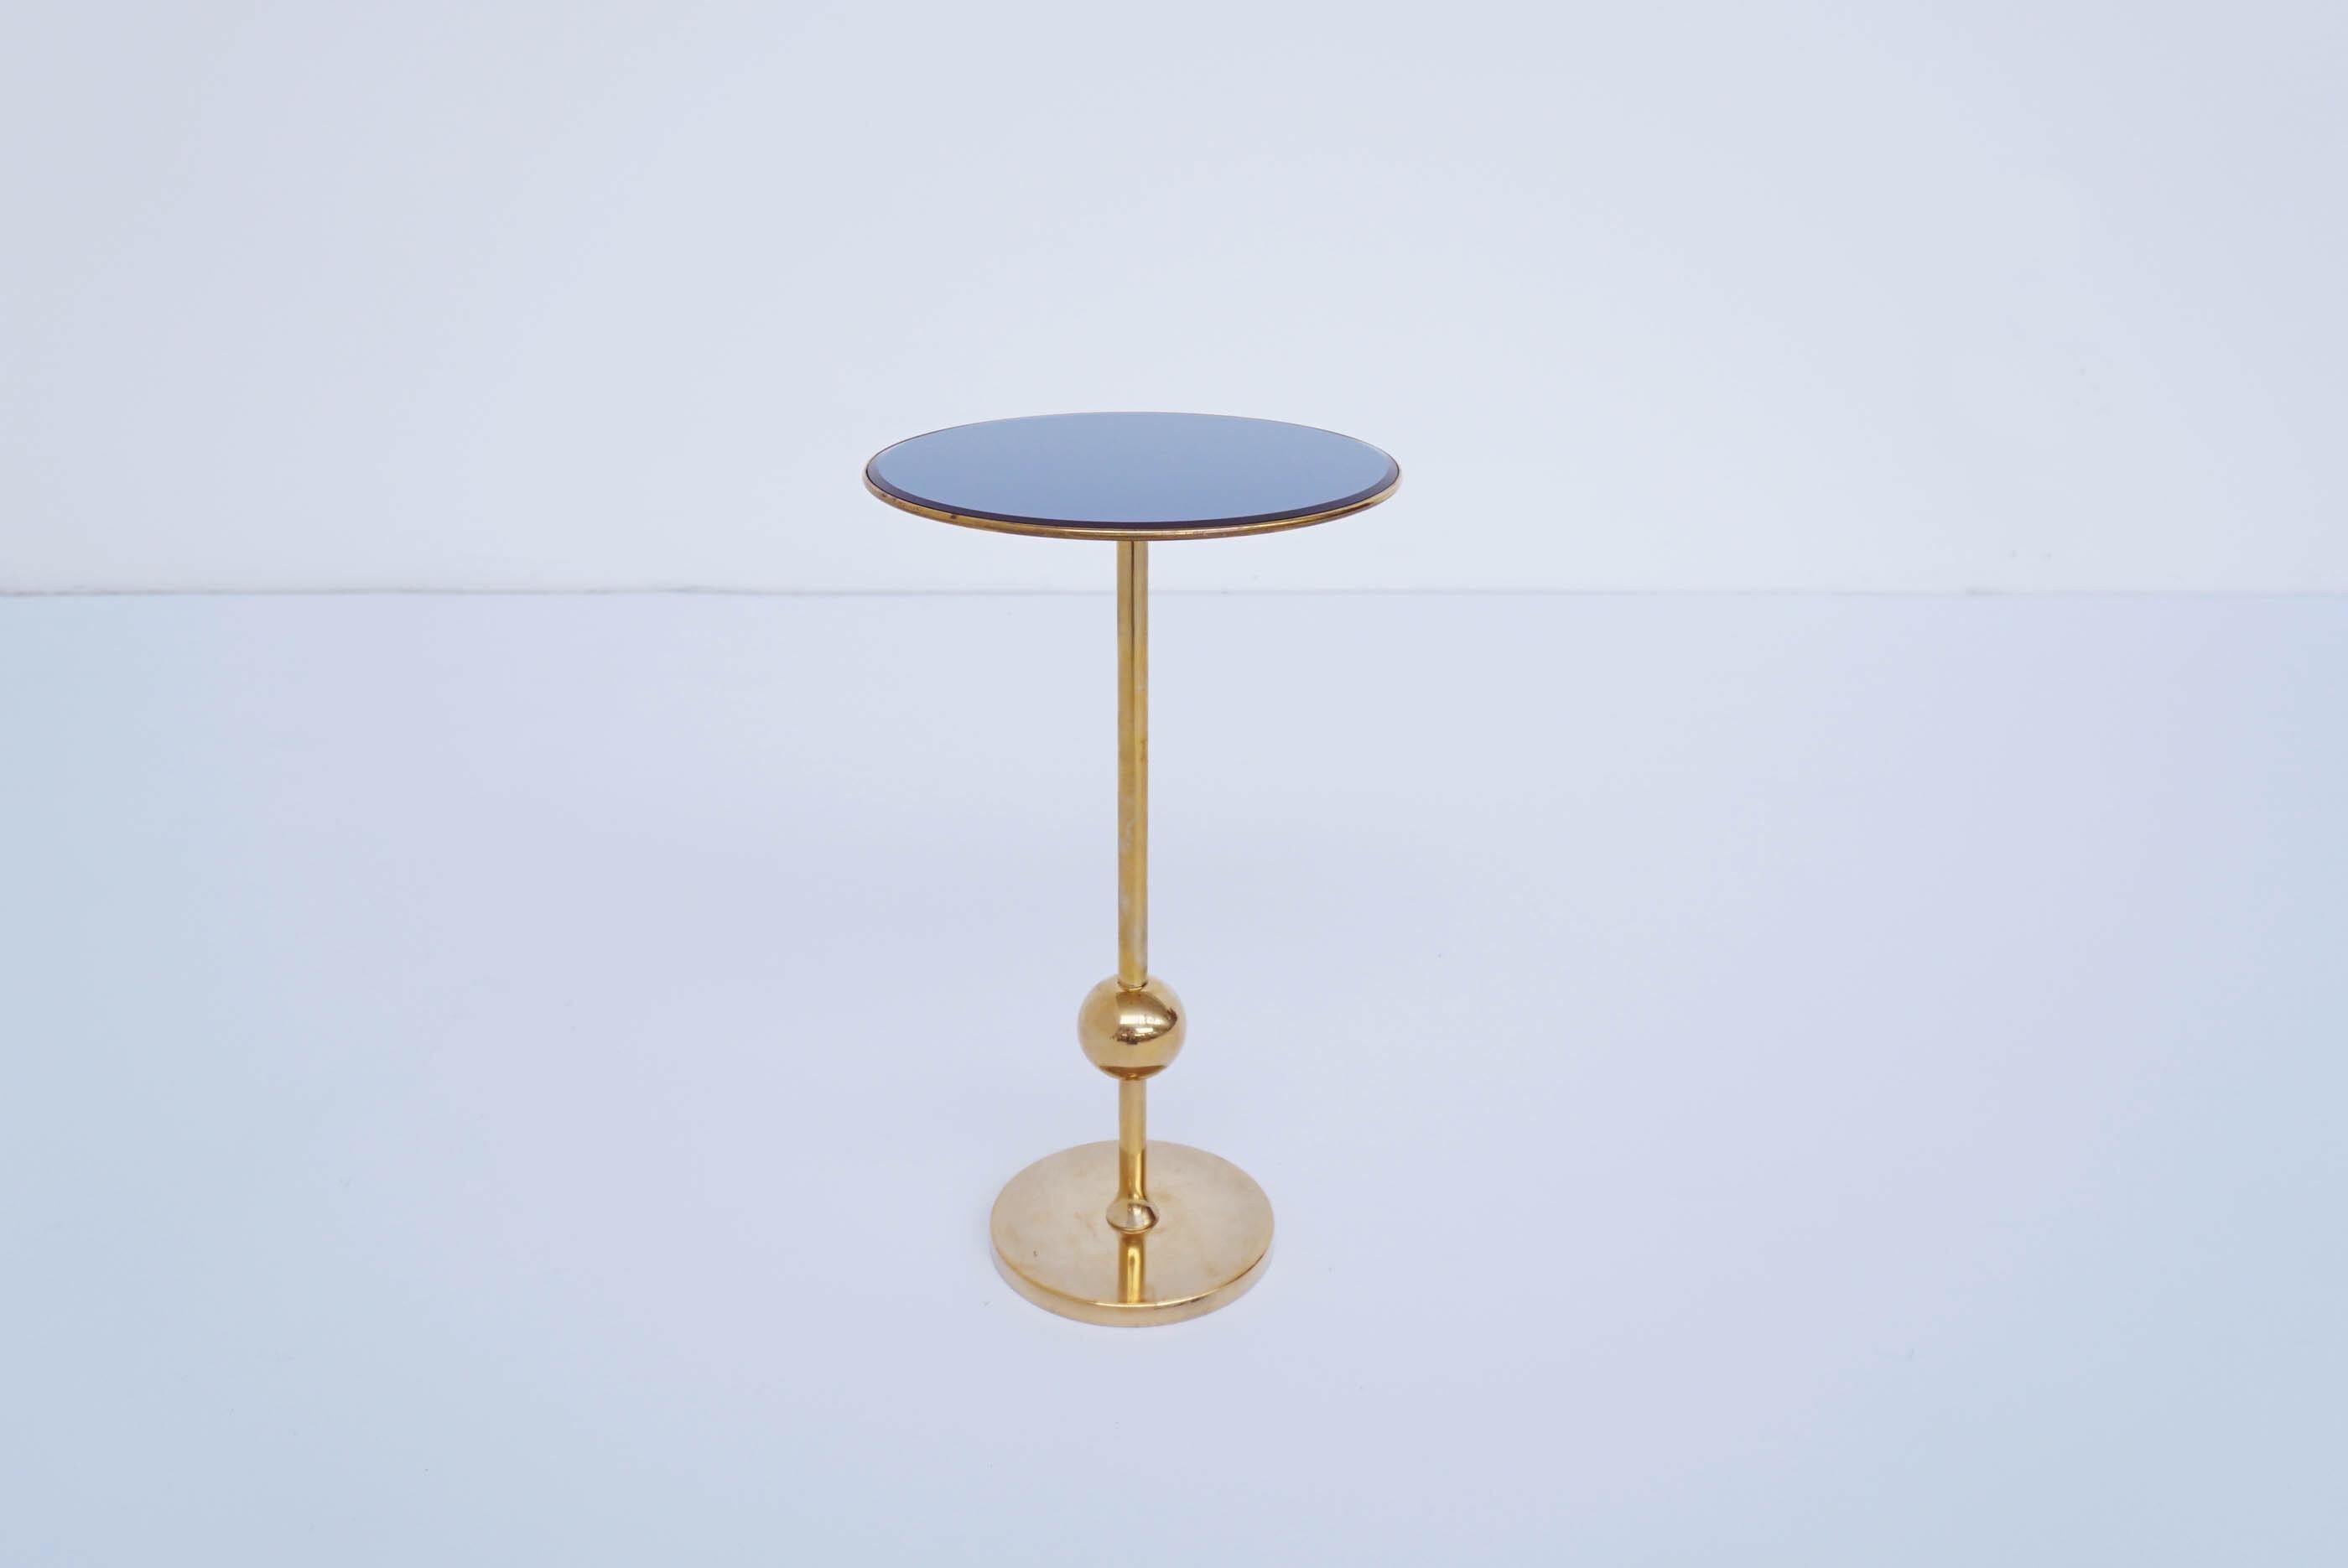 Rare iconic side table designed by Osvaldo Borsani and made by the Atelier Borsani Varedo.
Casting brass with elegant top in blu mirrored glass, a jewel for the home.